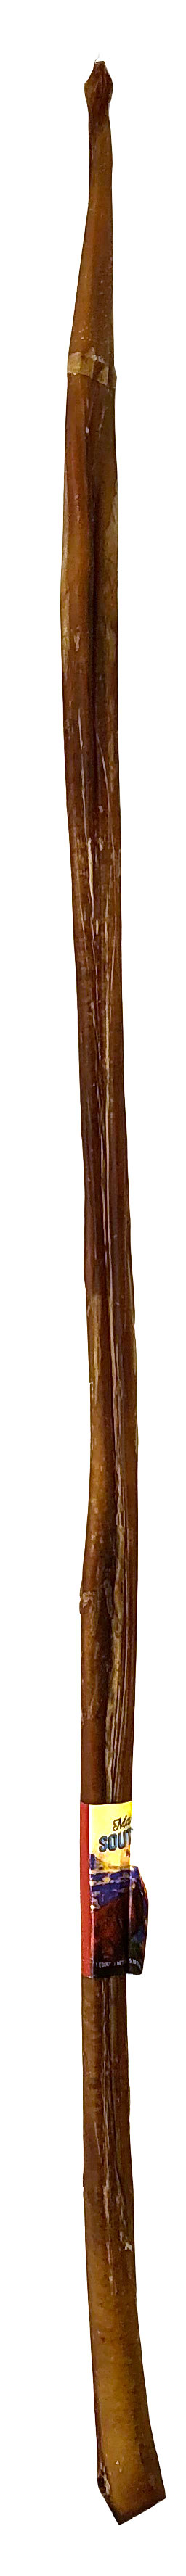 Hollywood Feed Made In South America Dog Chew - Full Bully Stick